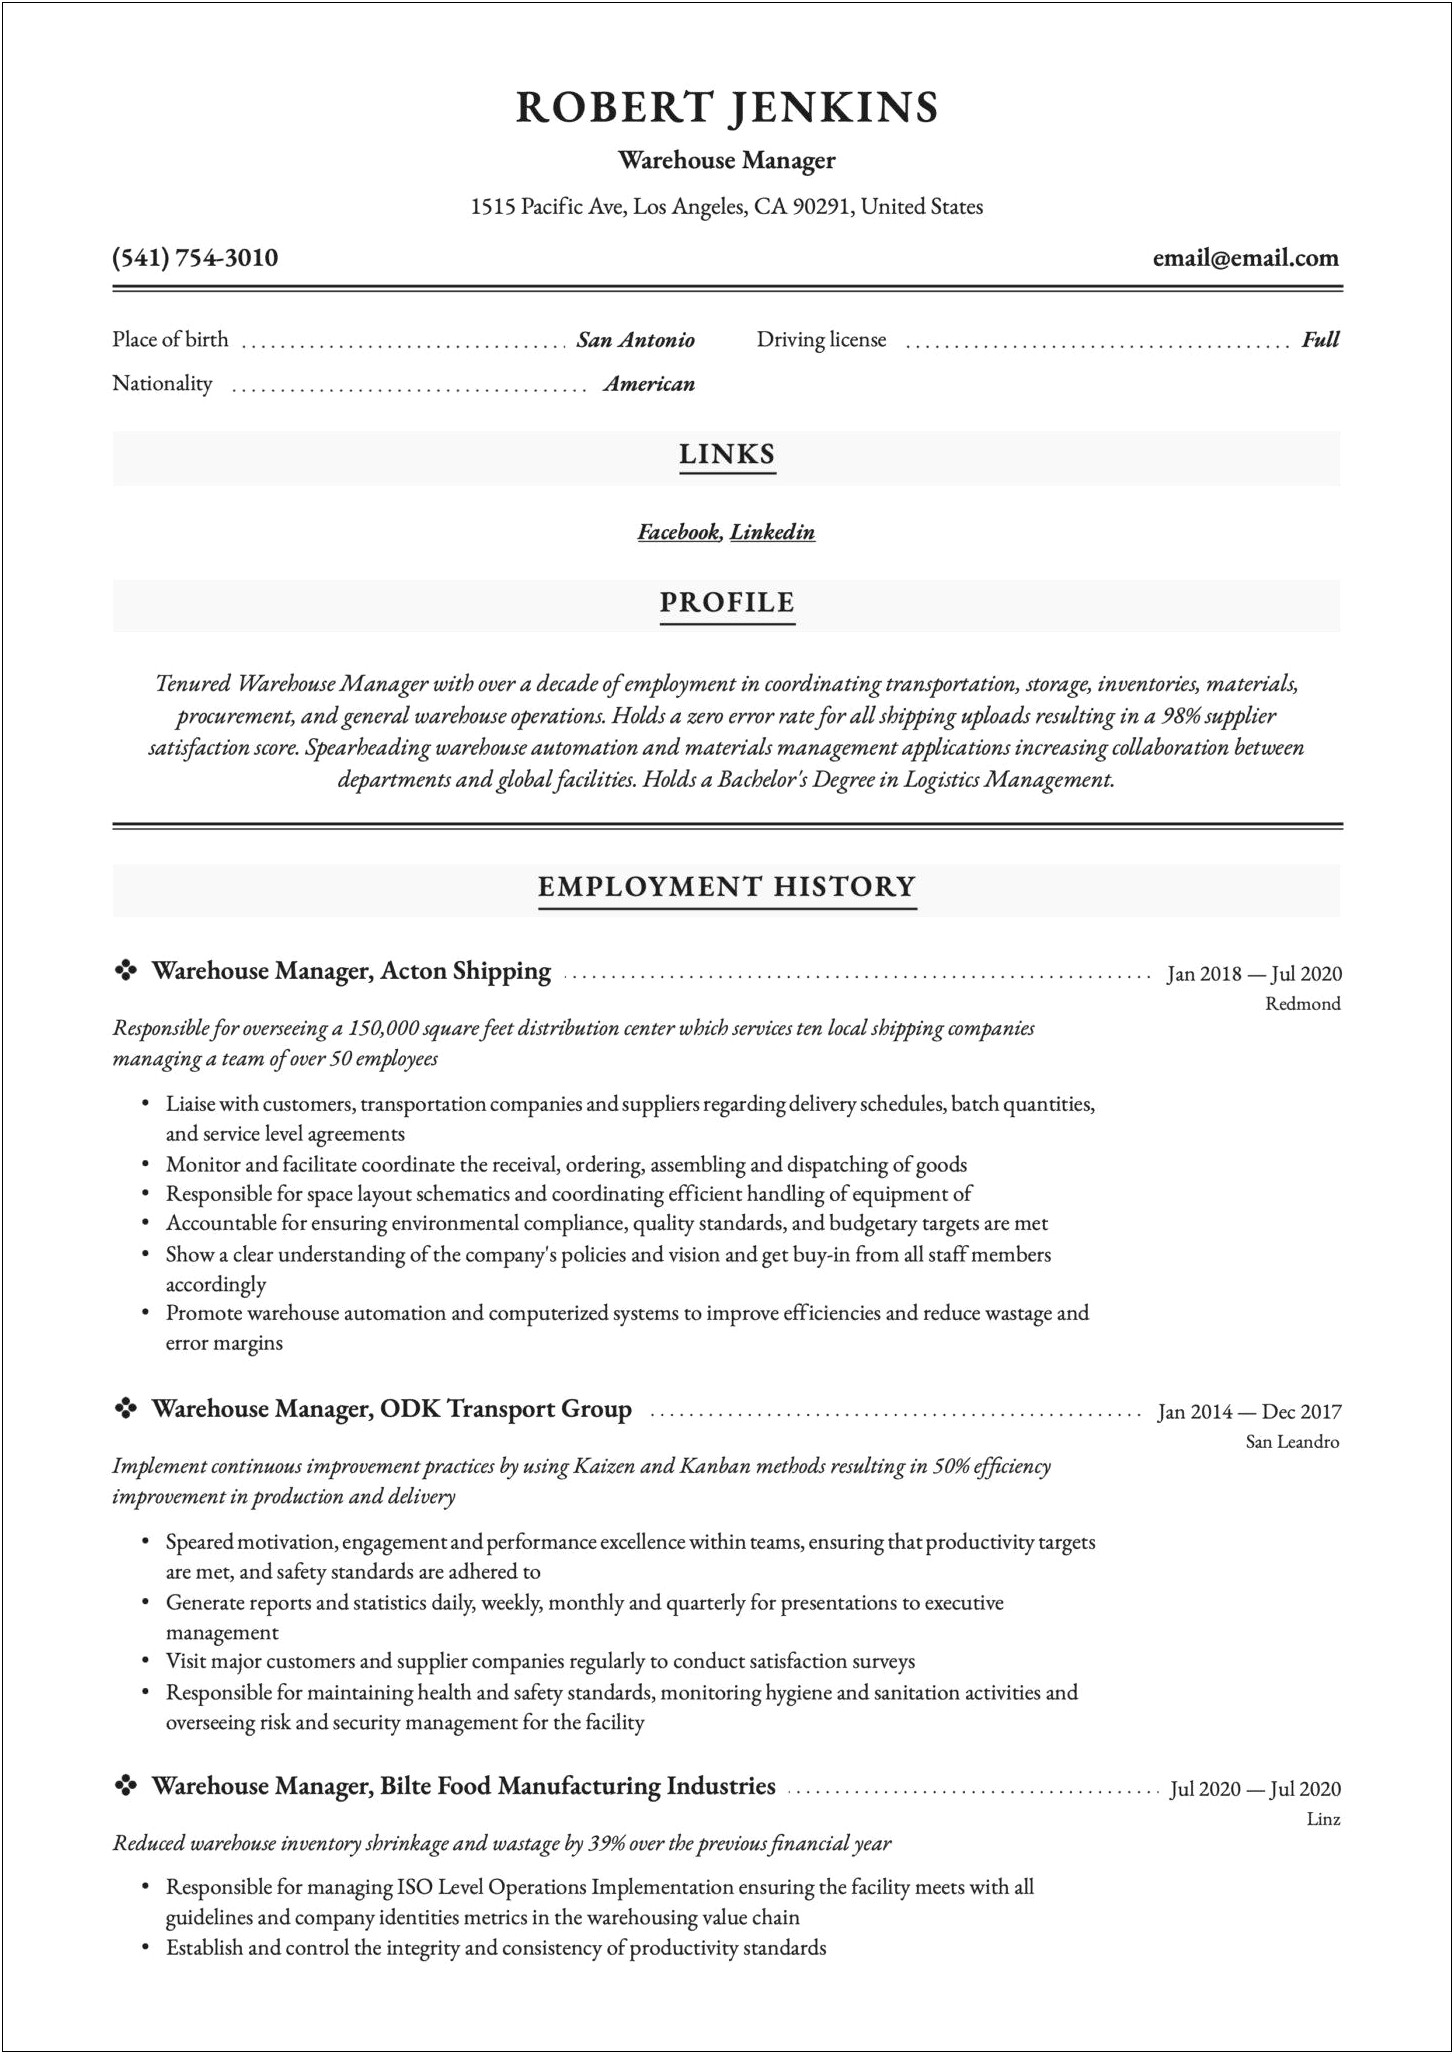 Skills For Warehouse Manager Resume